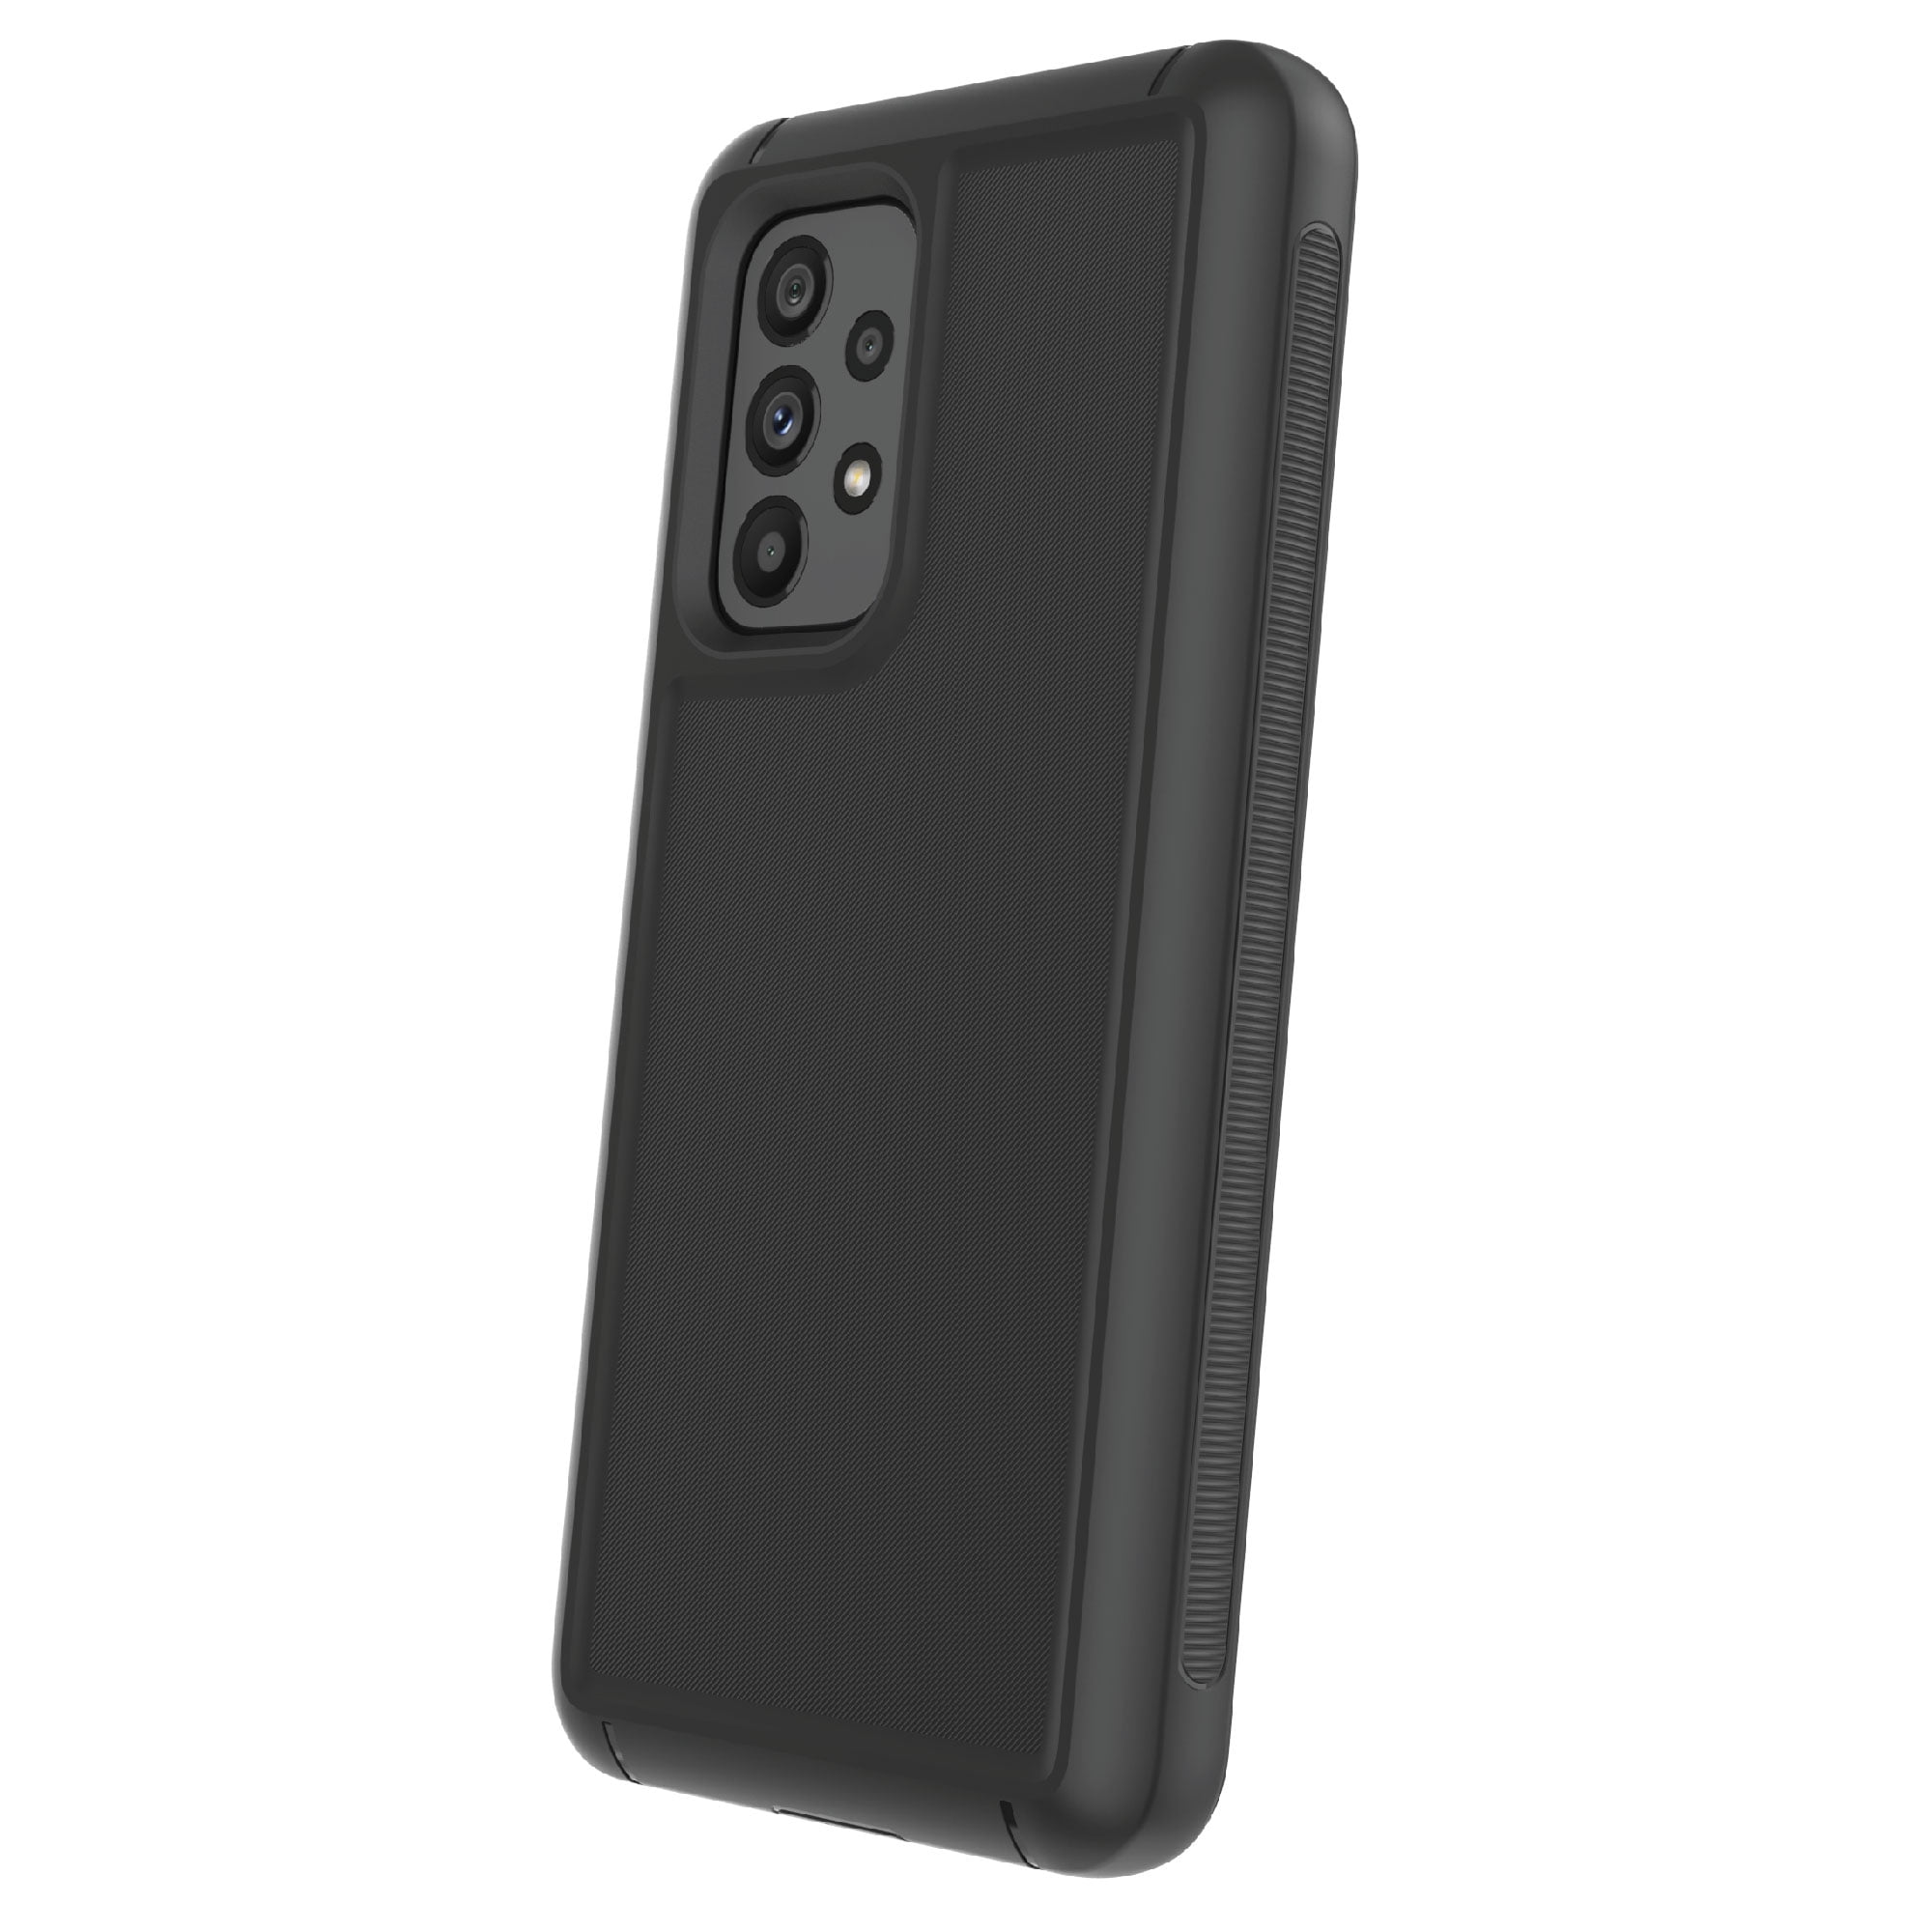  MAOUICI Case for ZTE Blade A53 Pro (6.52 inches),Black